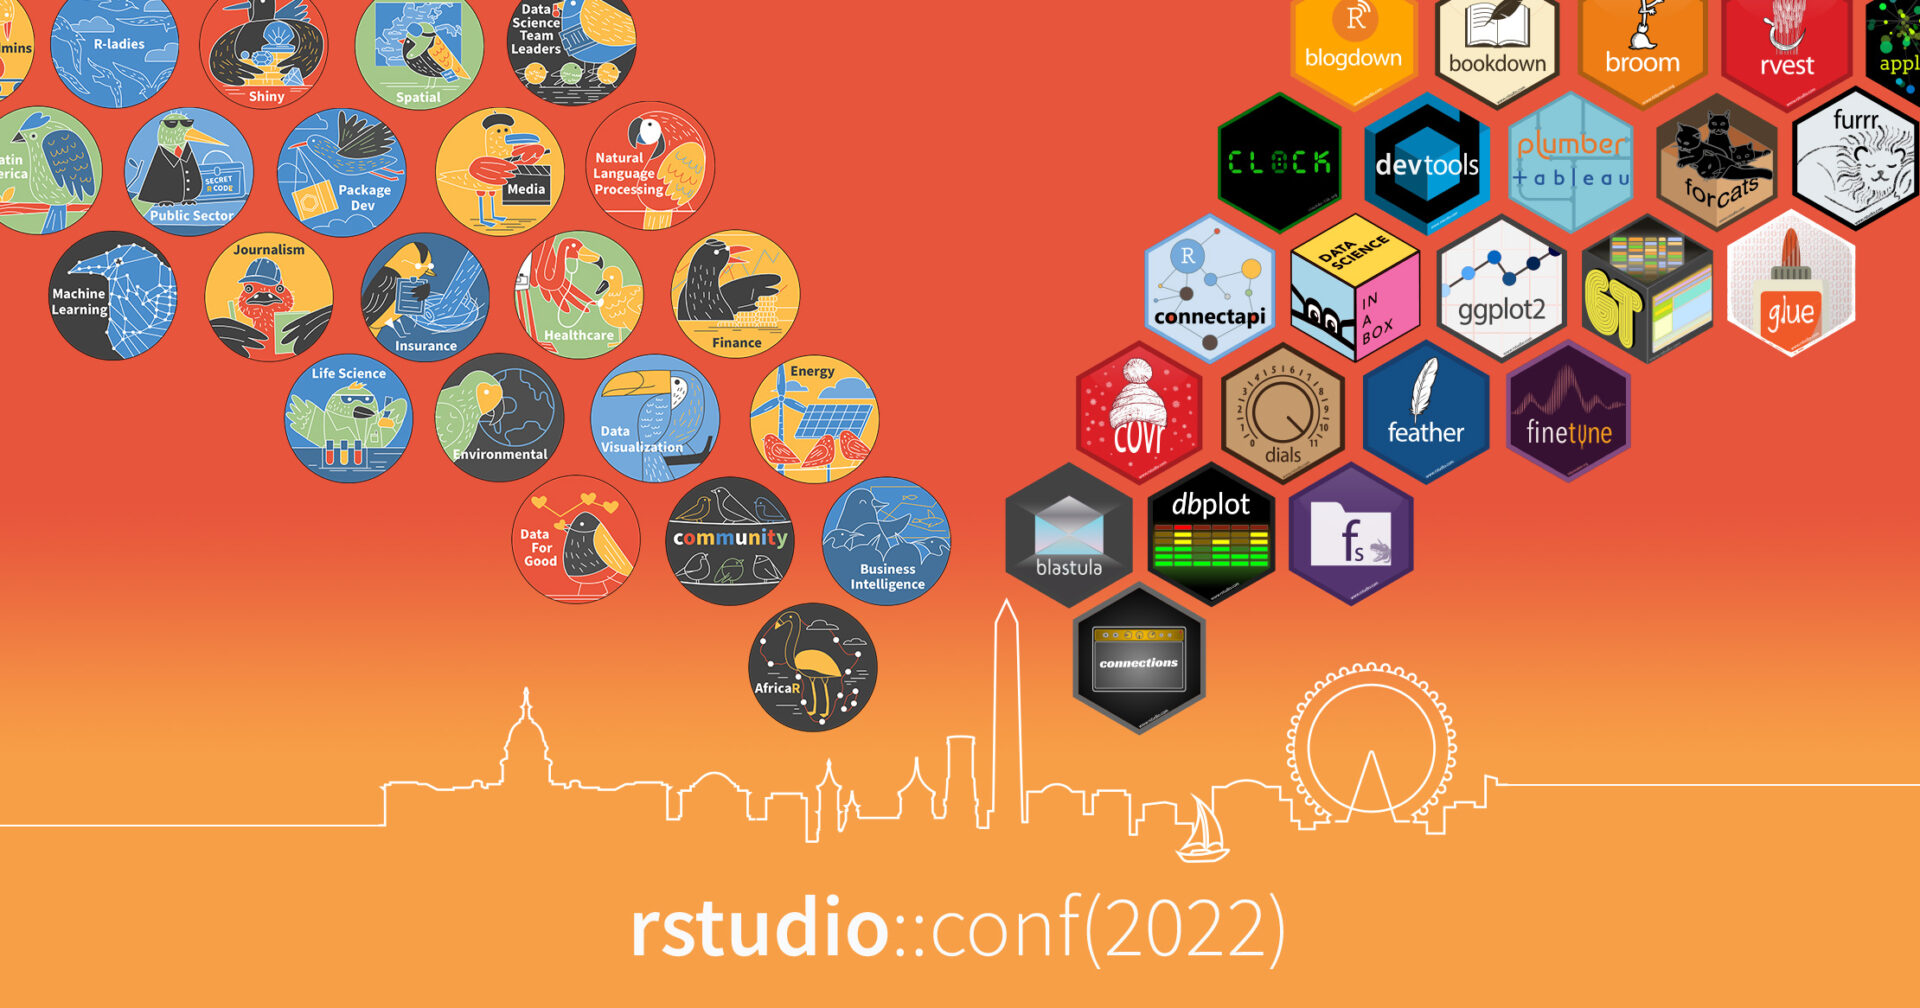 National Harbor skyline outline with the words rstudio conf 2022 underneath. Above the skyline float birds of a feather buttons with the names of the groups such as finance, life sciences on the left. On the right, hex stickers of various packages float towards the corner.